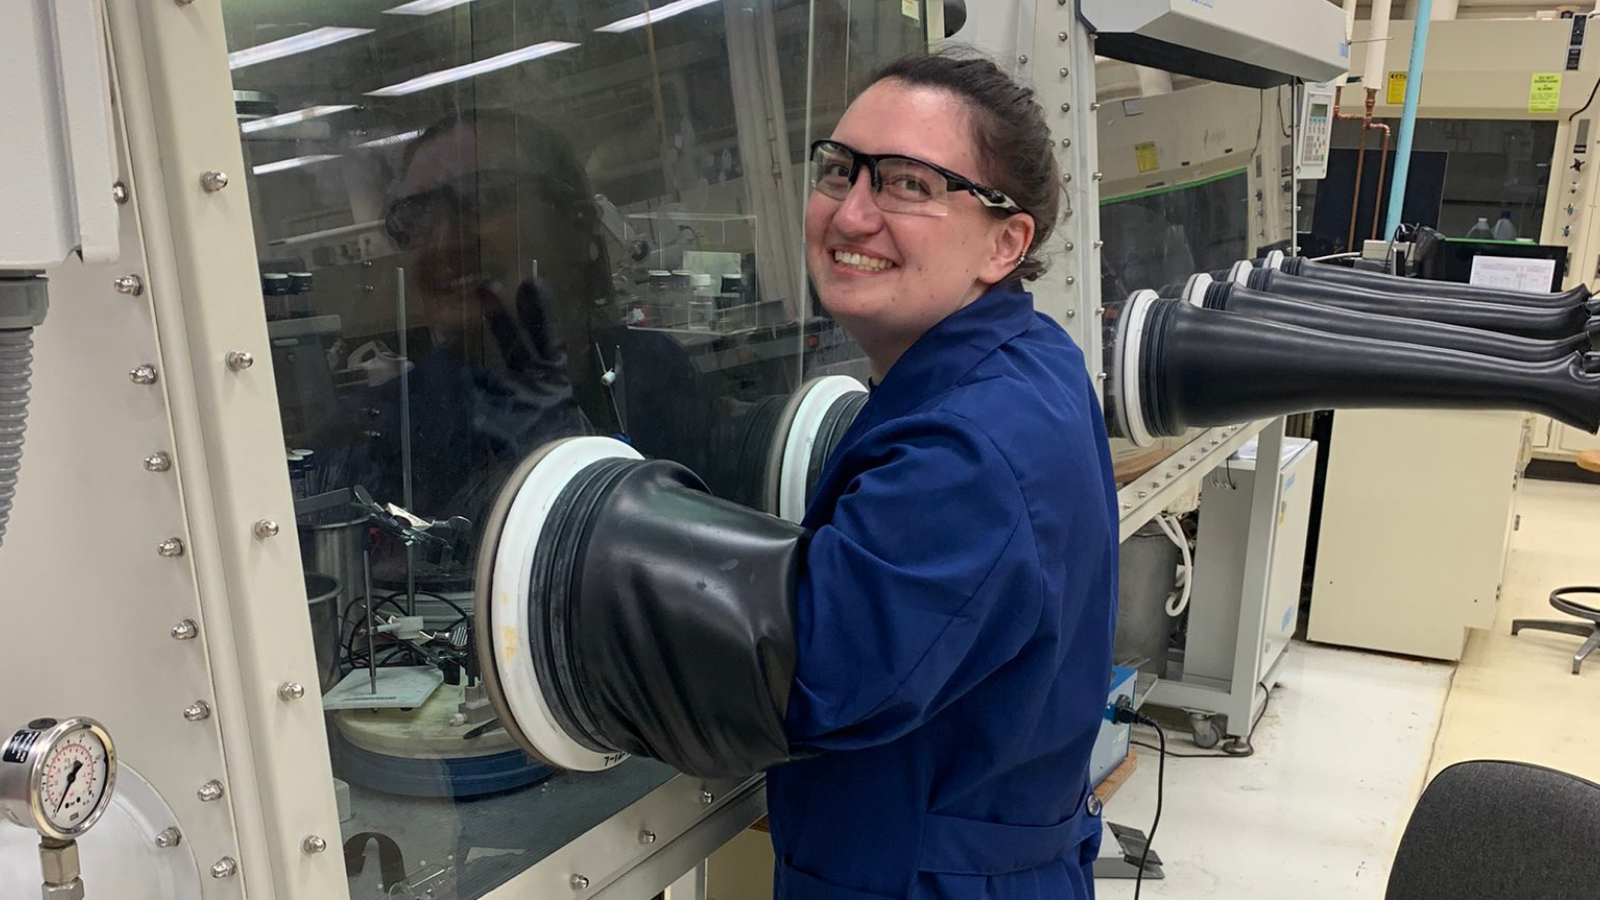 Becca Segel in a lab wearing goggles and a blue lab coat smiling at the camera